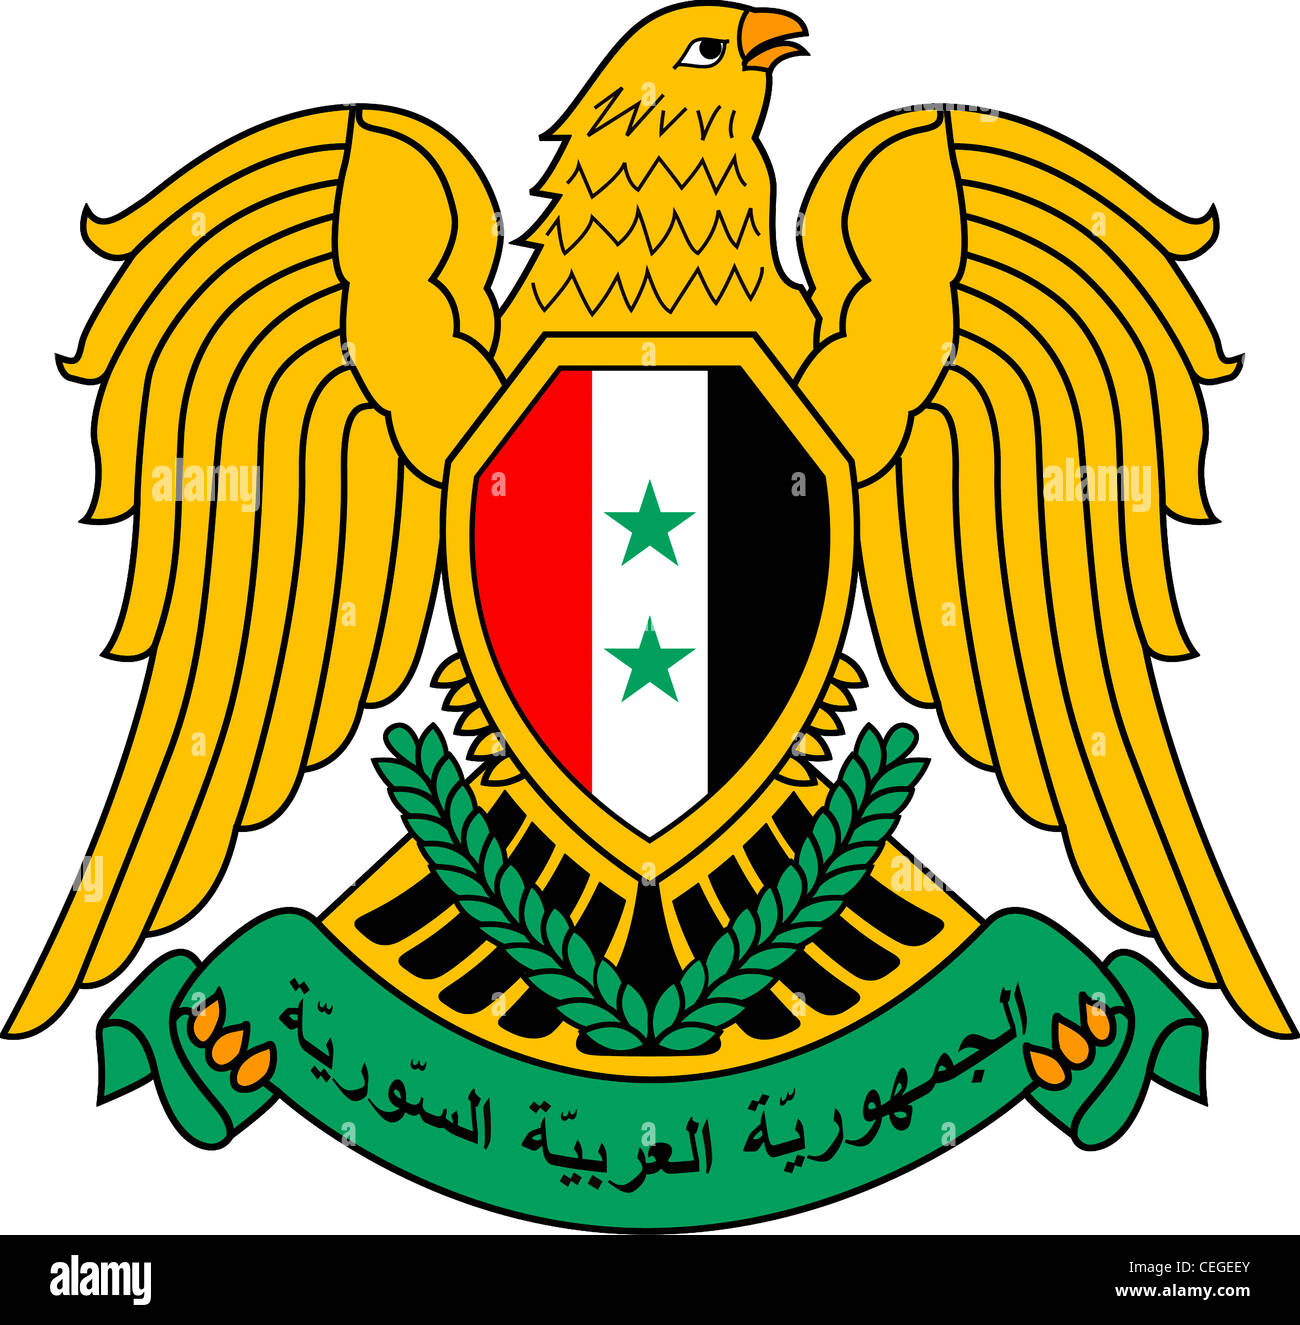 Coat of arms of the Arabian Republic of Syria. Stock Photo